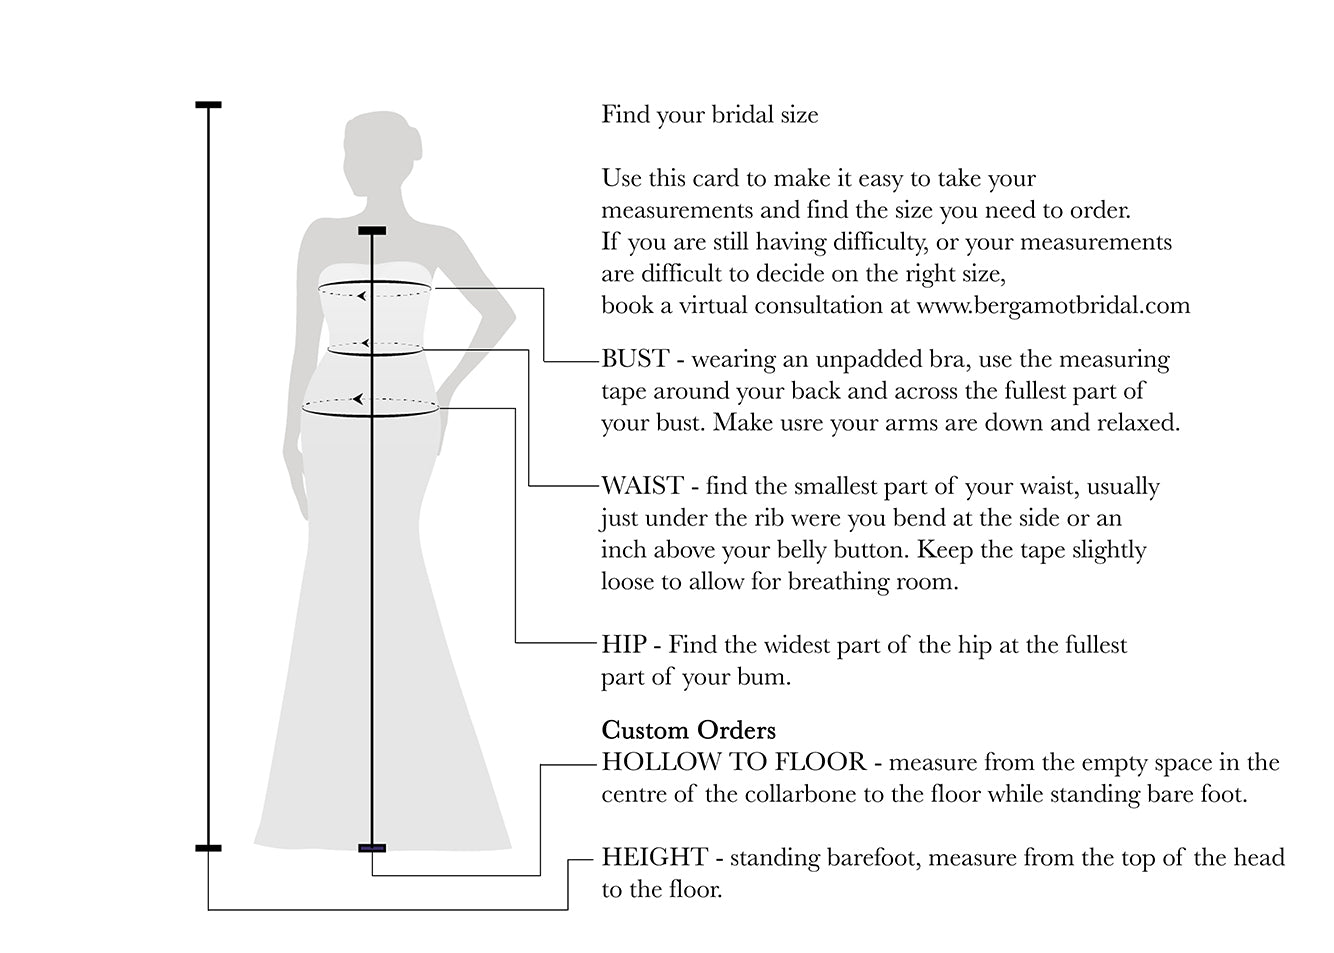 Illustration demonstrating various body measurement points for a Bergamot Bridal Crepe Sheath Wedding Dress with Lace Cap Sleeves with Detachable Train, including bust, waist, and hip, alongside instructions for measuring from hollow to floor.